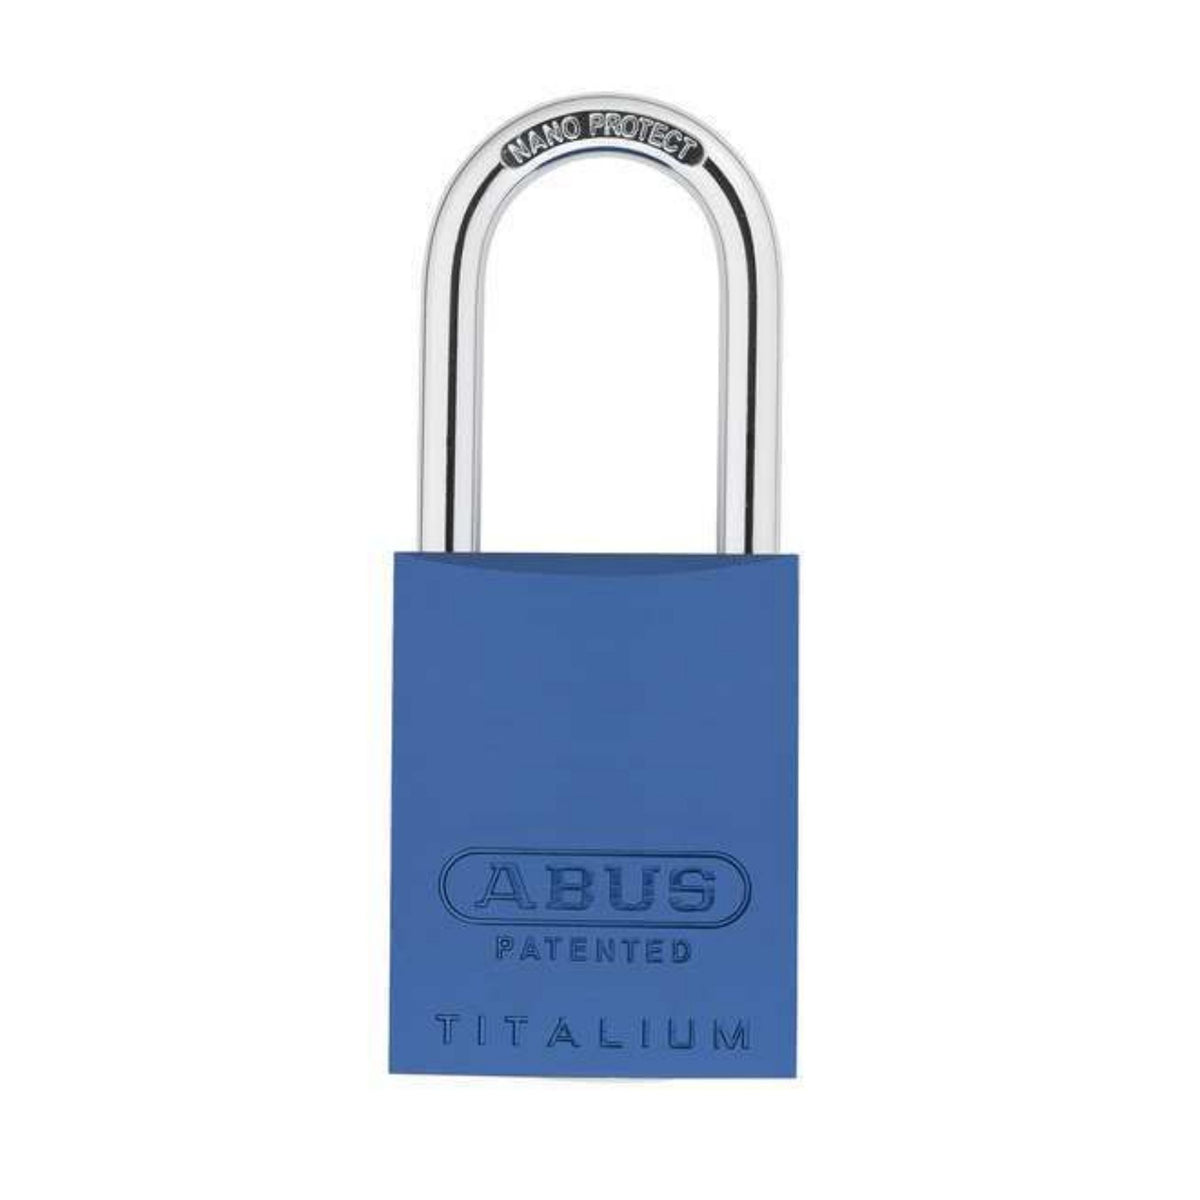 Abus 83AL/40-100 Blue Titalium Safety Lock with Yale Keyway - The Lock Source